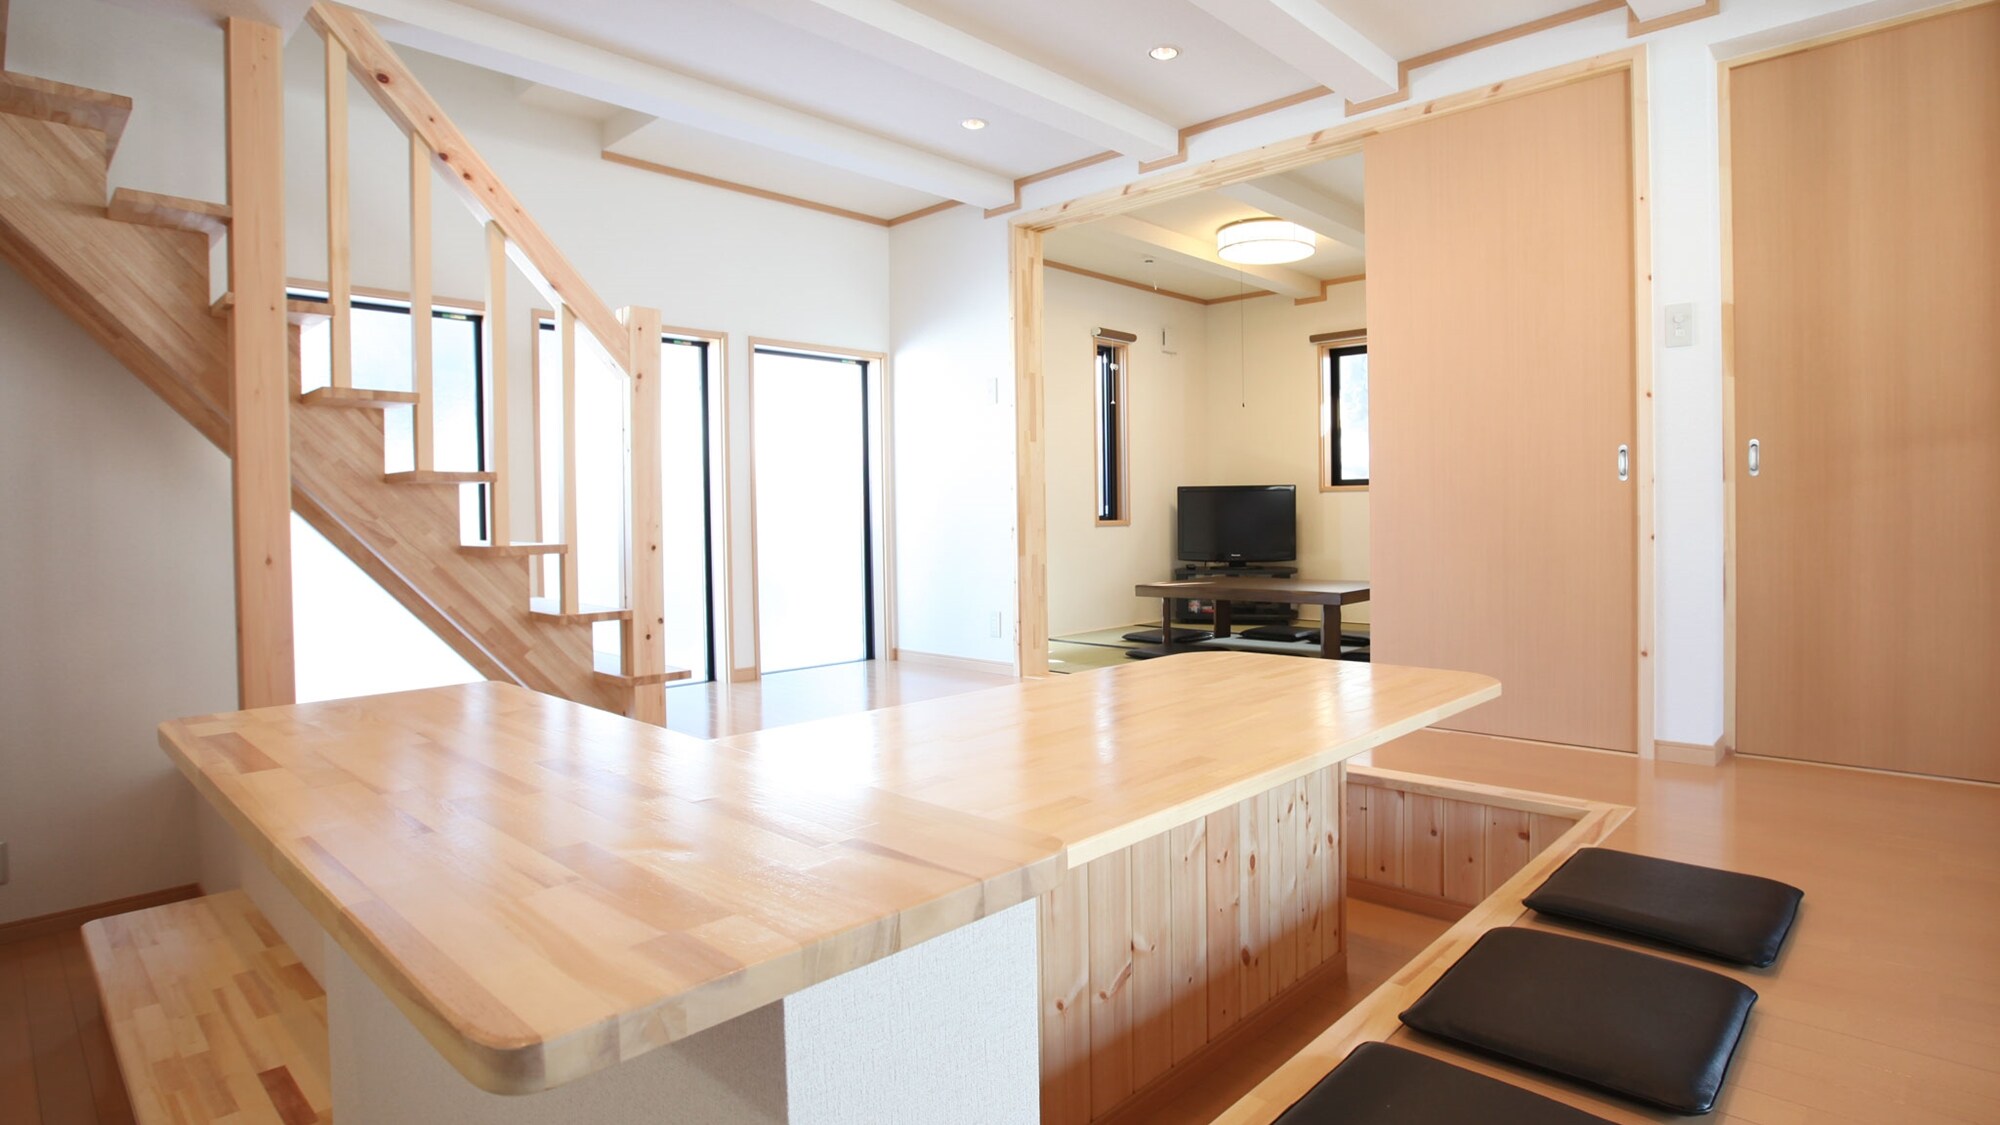 * [Example of guest room] Horigotatsu-style dining table in the modern Japanese building